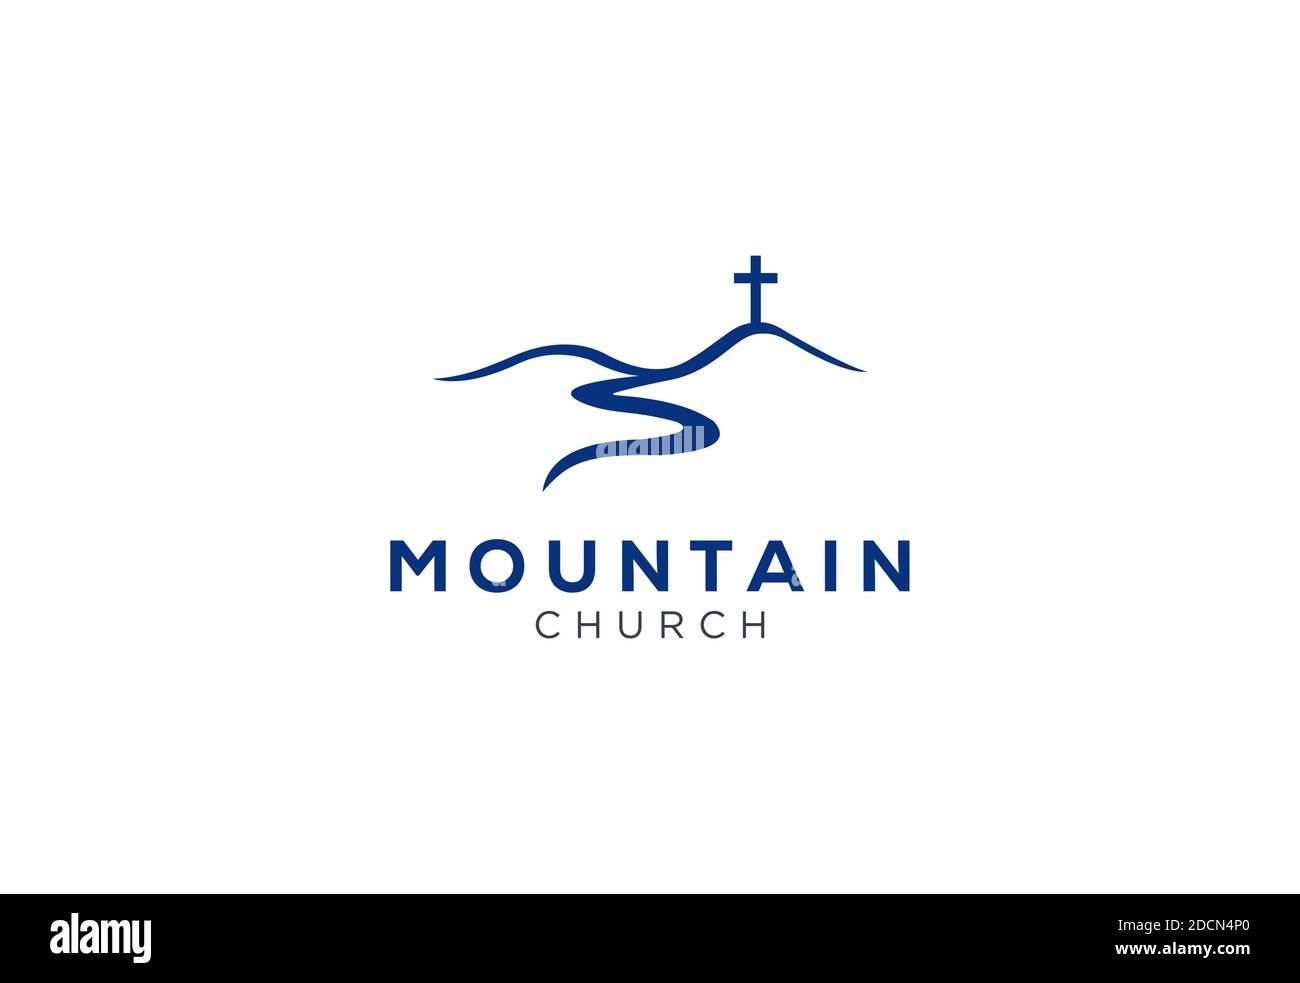 Church logo Cut Out Stock Images & Pictures - Alamy